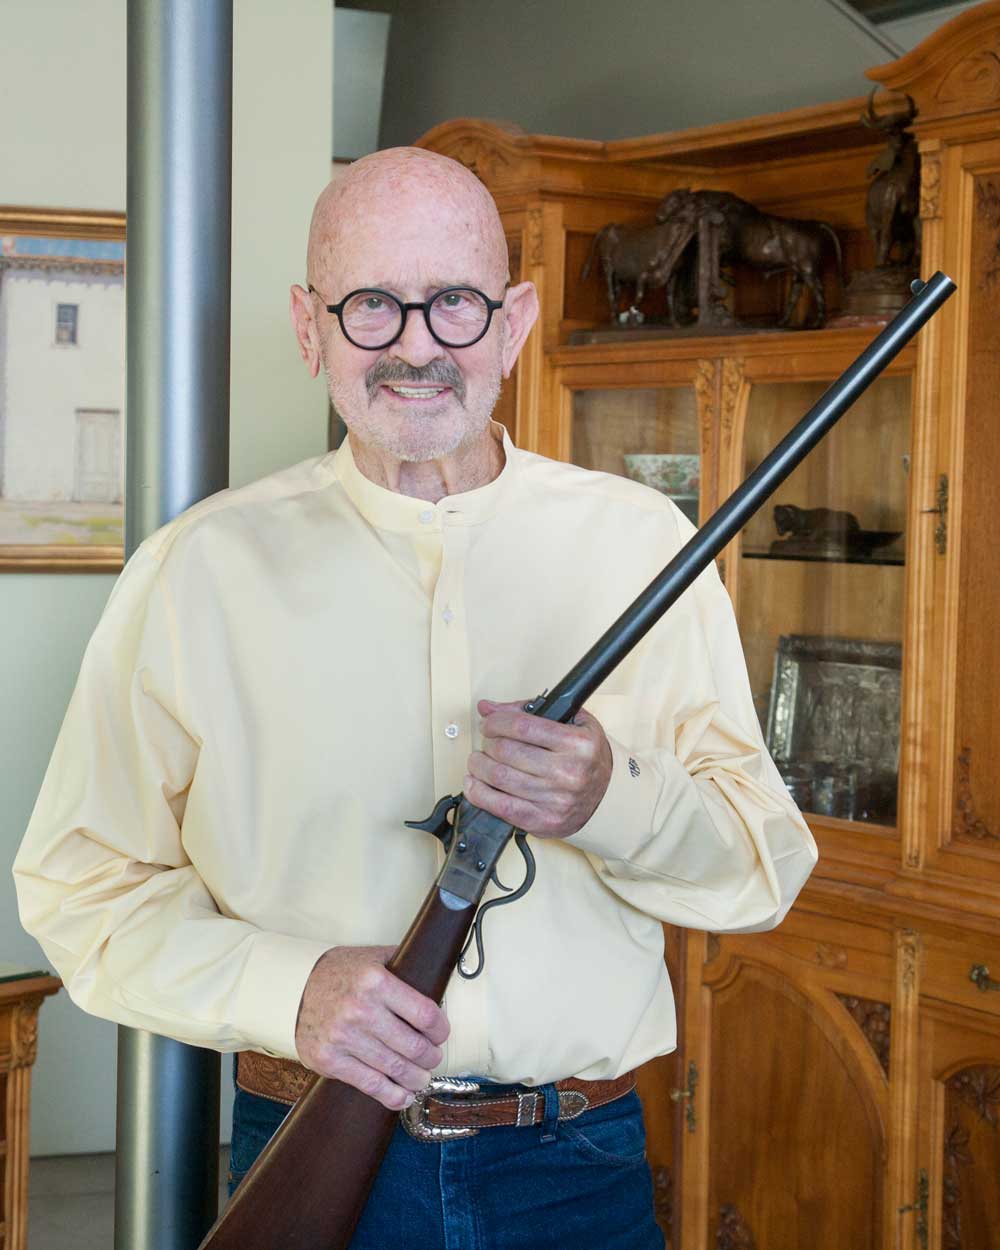 Brad Witherell, an older gentleman, stands facing the camera holding an antique rifle. He is wearing a long-sleeved, yellow button-up shirt, belt, and jeans.